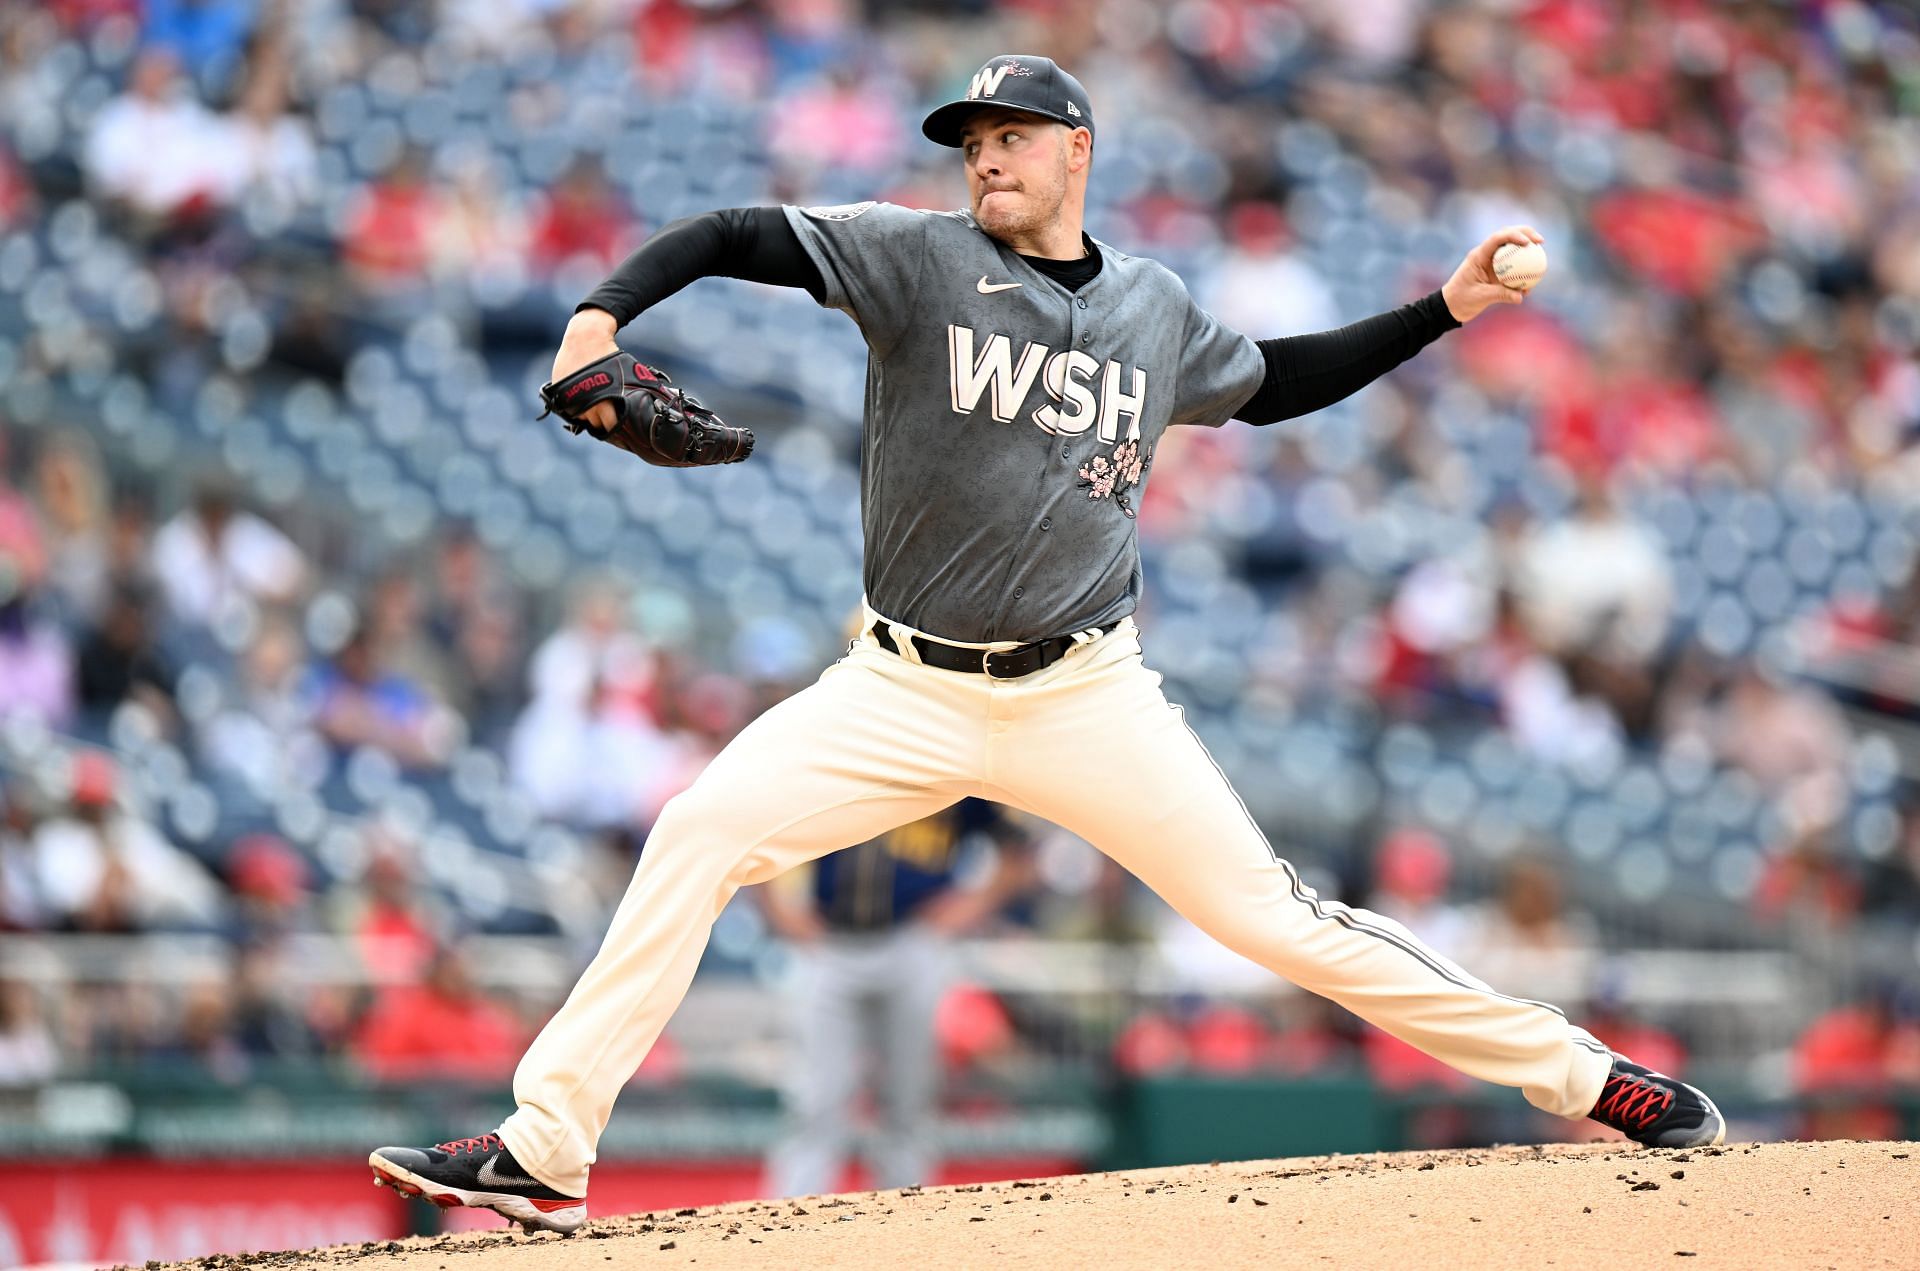 Patrick Corbin pitches for the Washington Nationals.